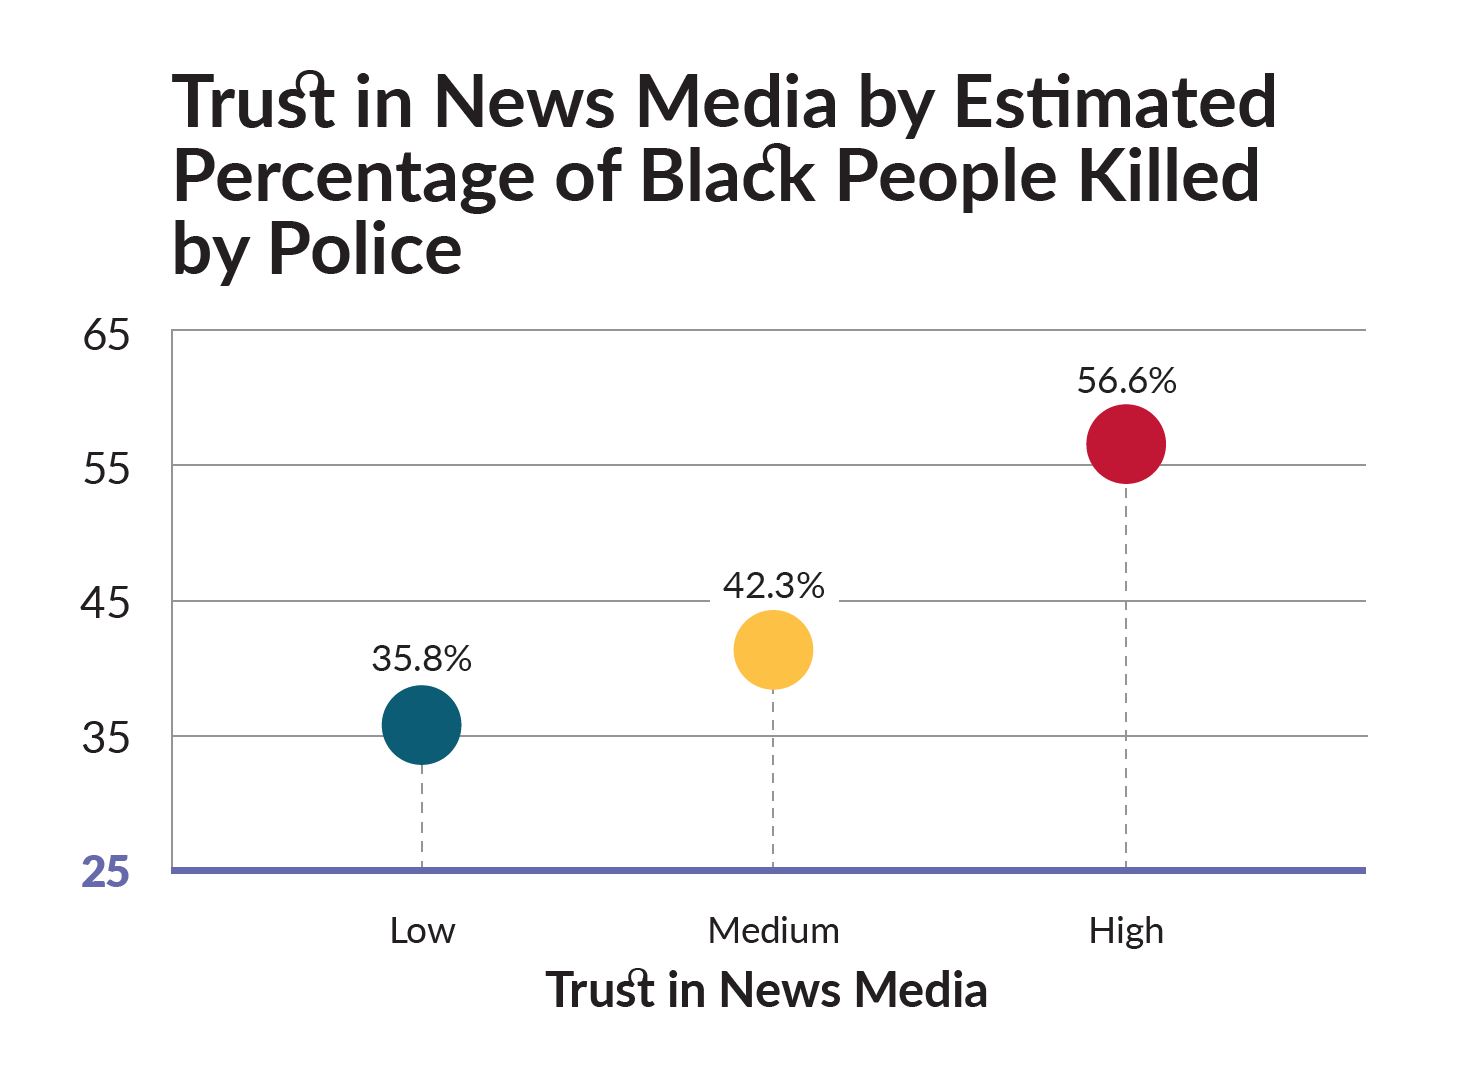 Trust in News Media by Estimated Percentage of Black People Killed by Police